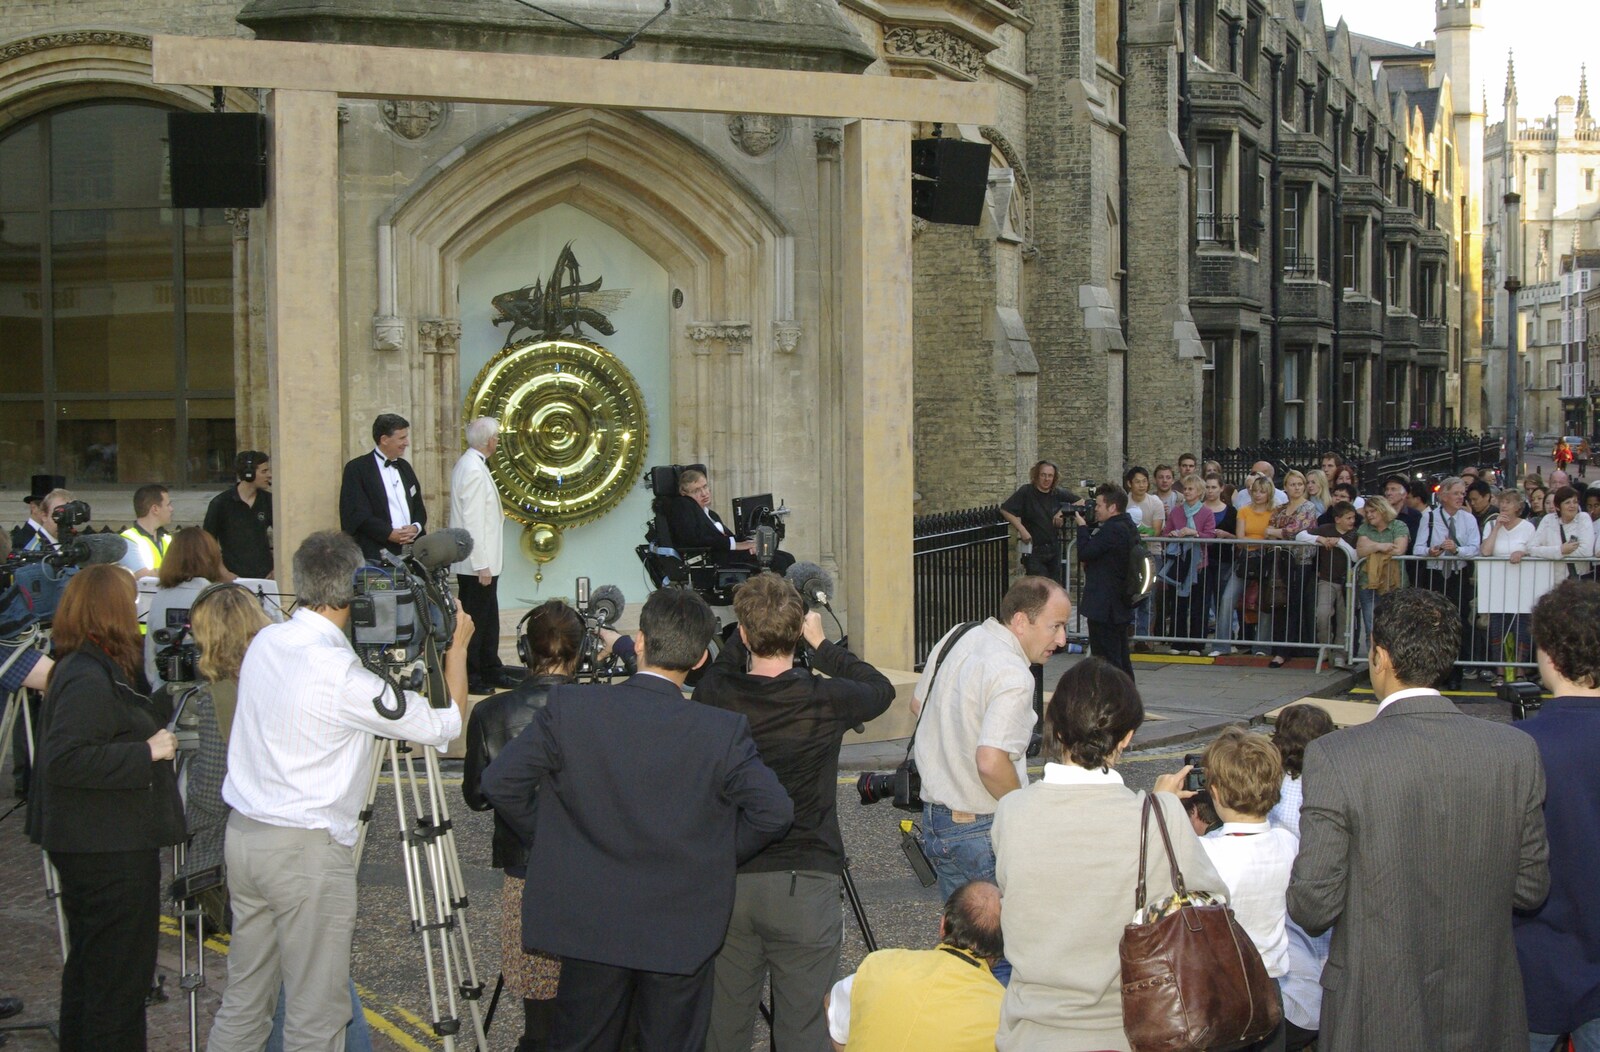 A Brief Time in History: Stephen Hawking and the Corpus Christi Clock, Benet Street, Cambridge - 19th September 2008: The clock on the corner of Benet Street